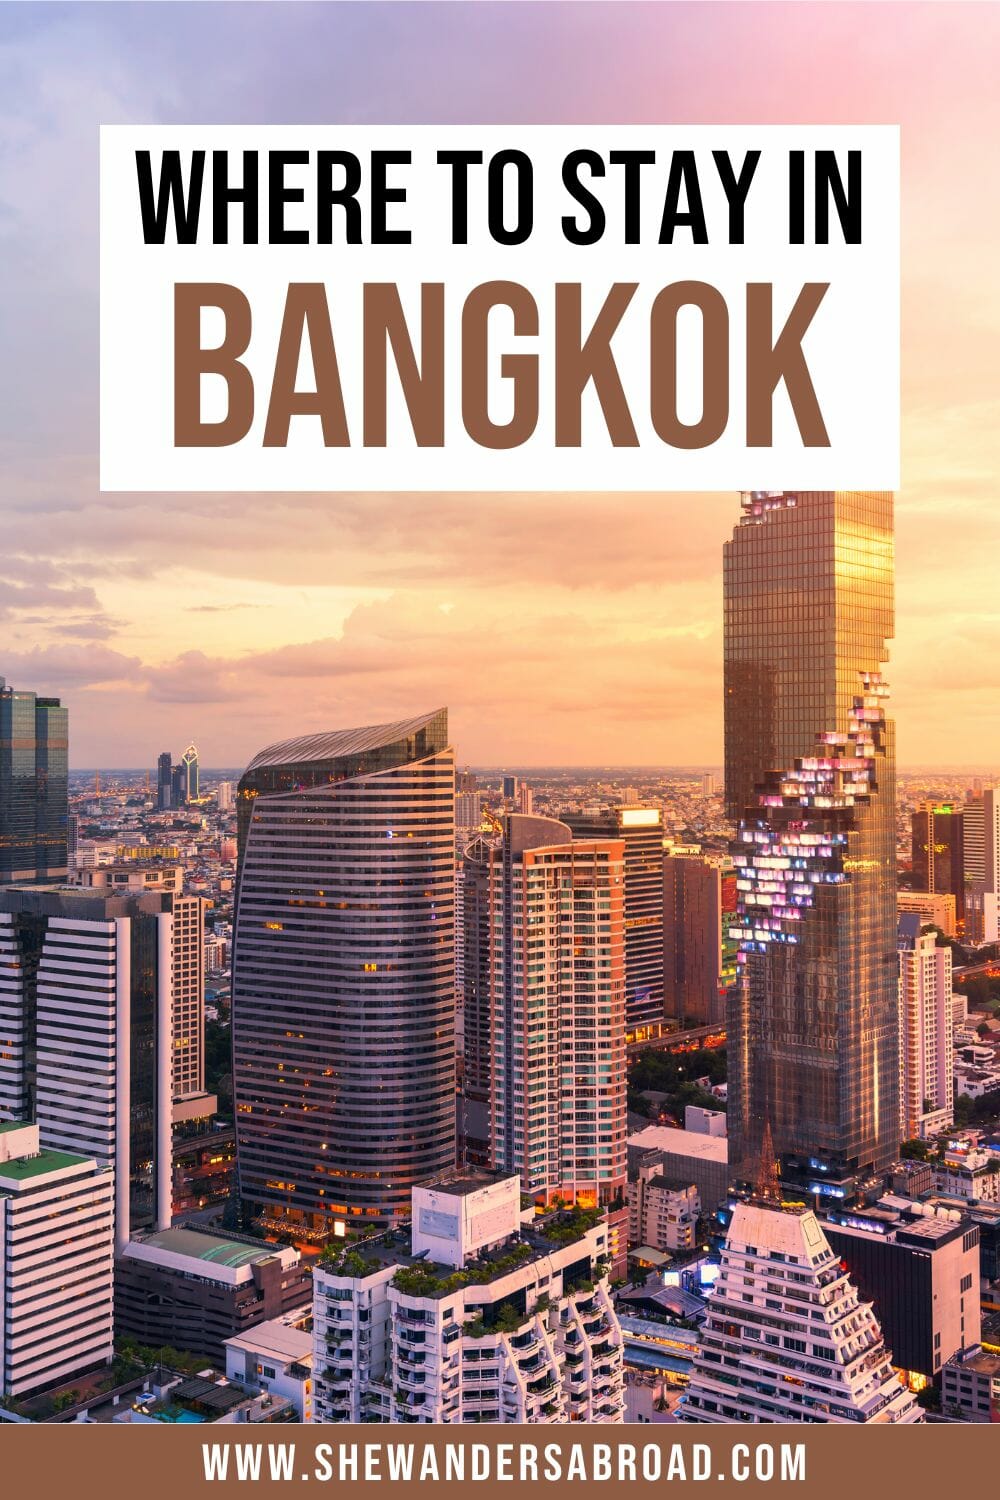 Where to Stay in Bangkok: 7 Best Areas & Hotels